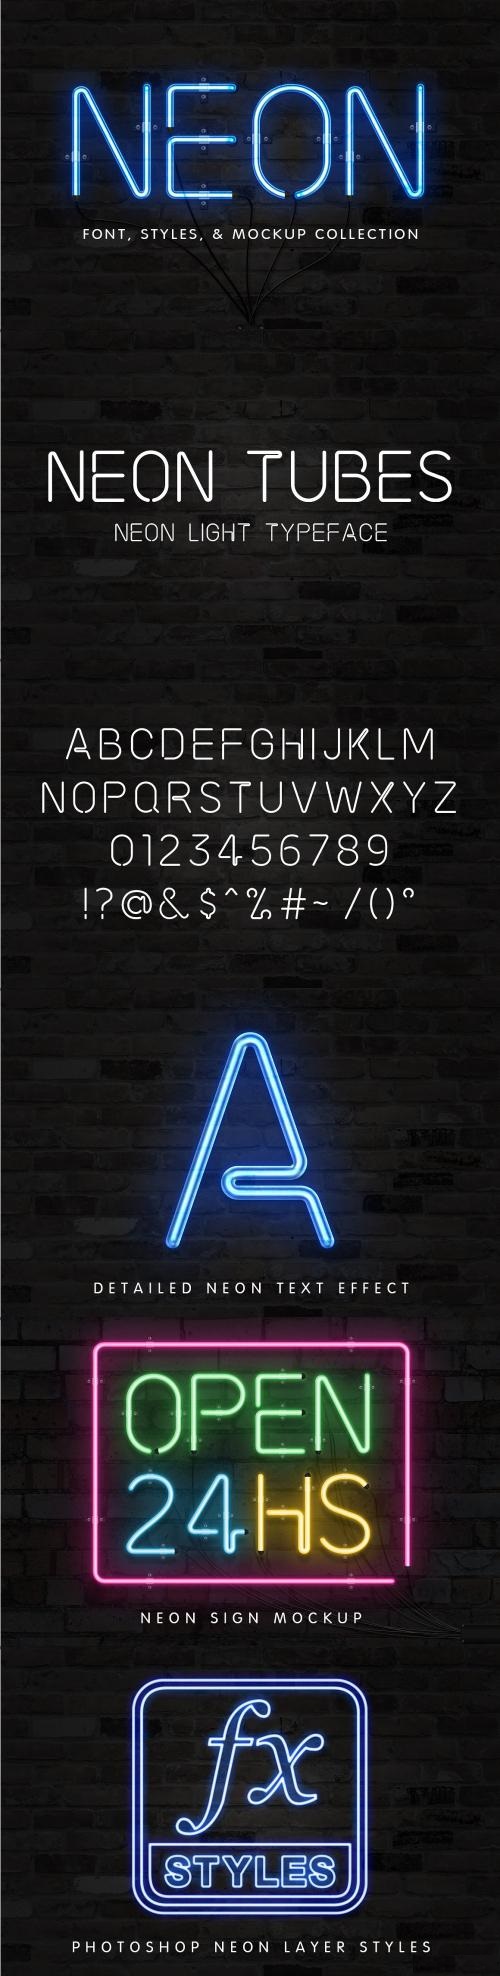 The Neon Font & Sign Collection - 1874128